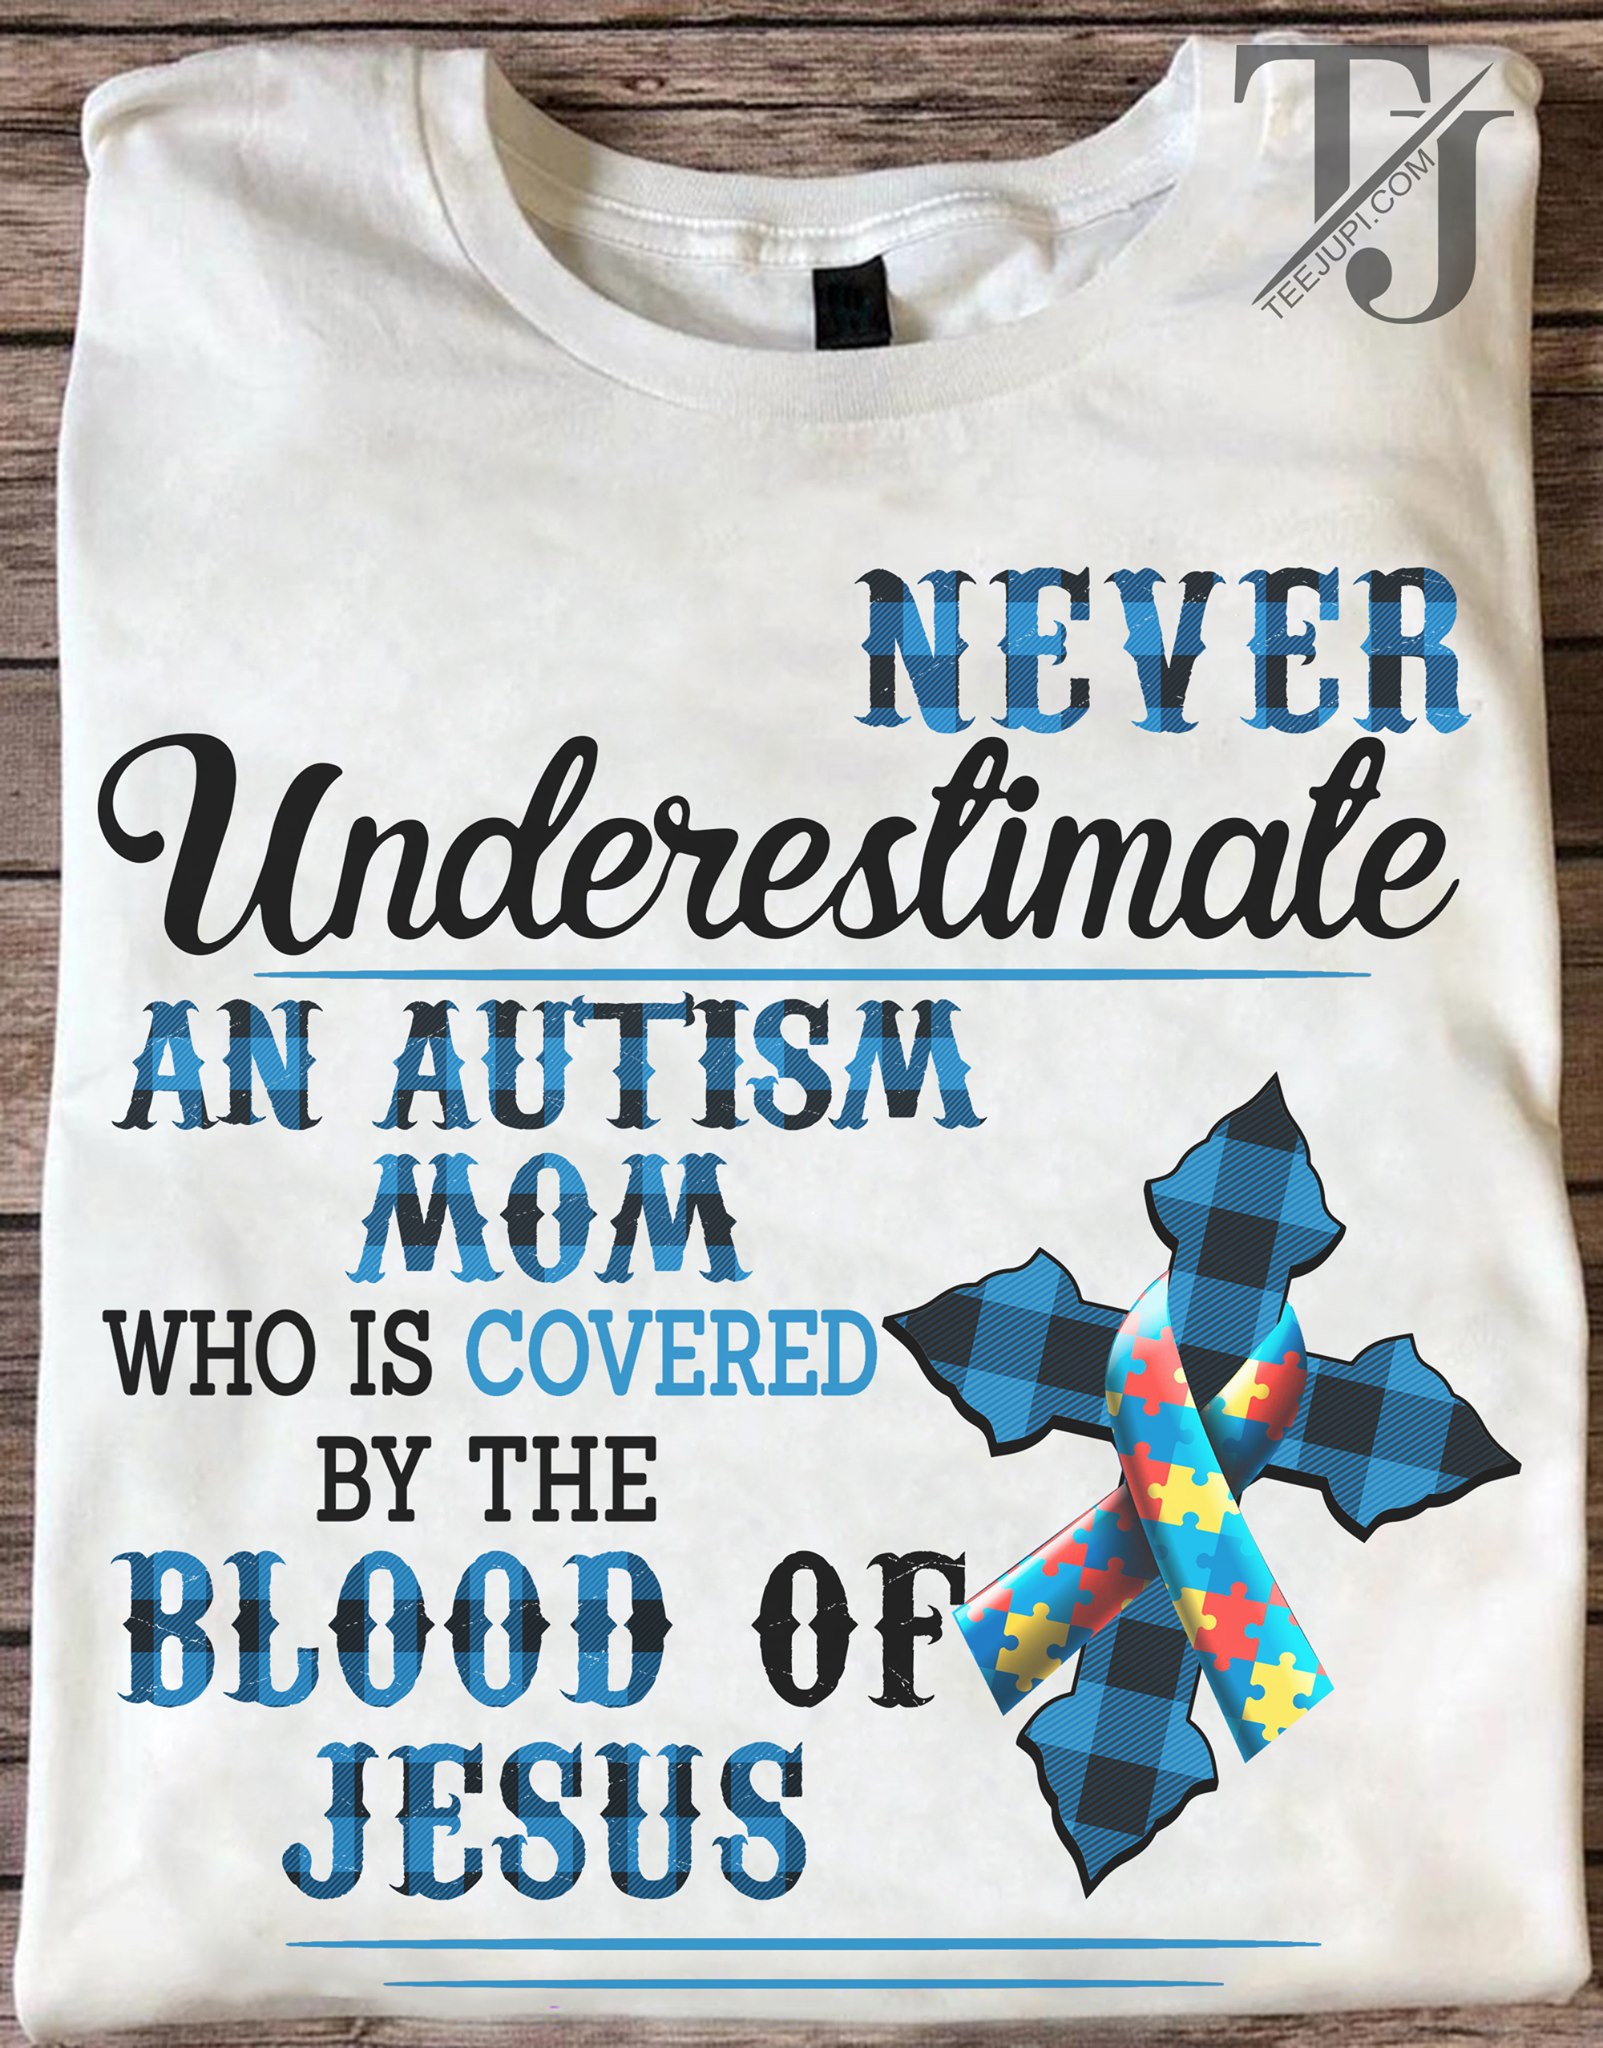 Never underestimate an autism mom who is covered by the blood of Jesus